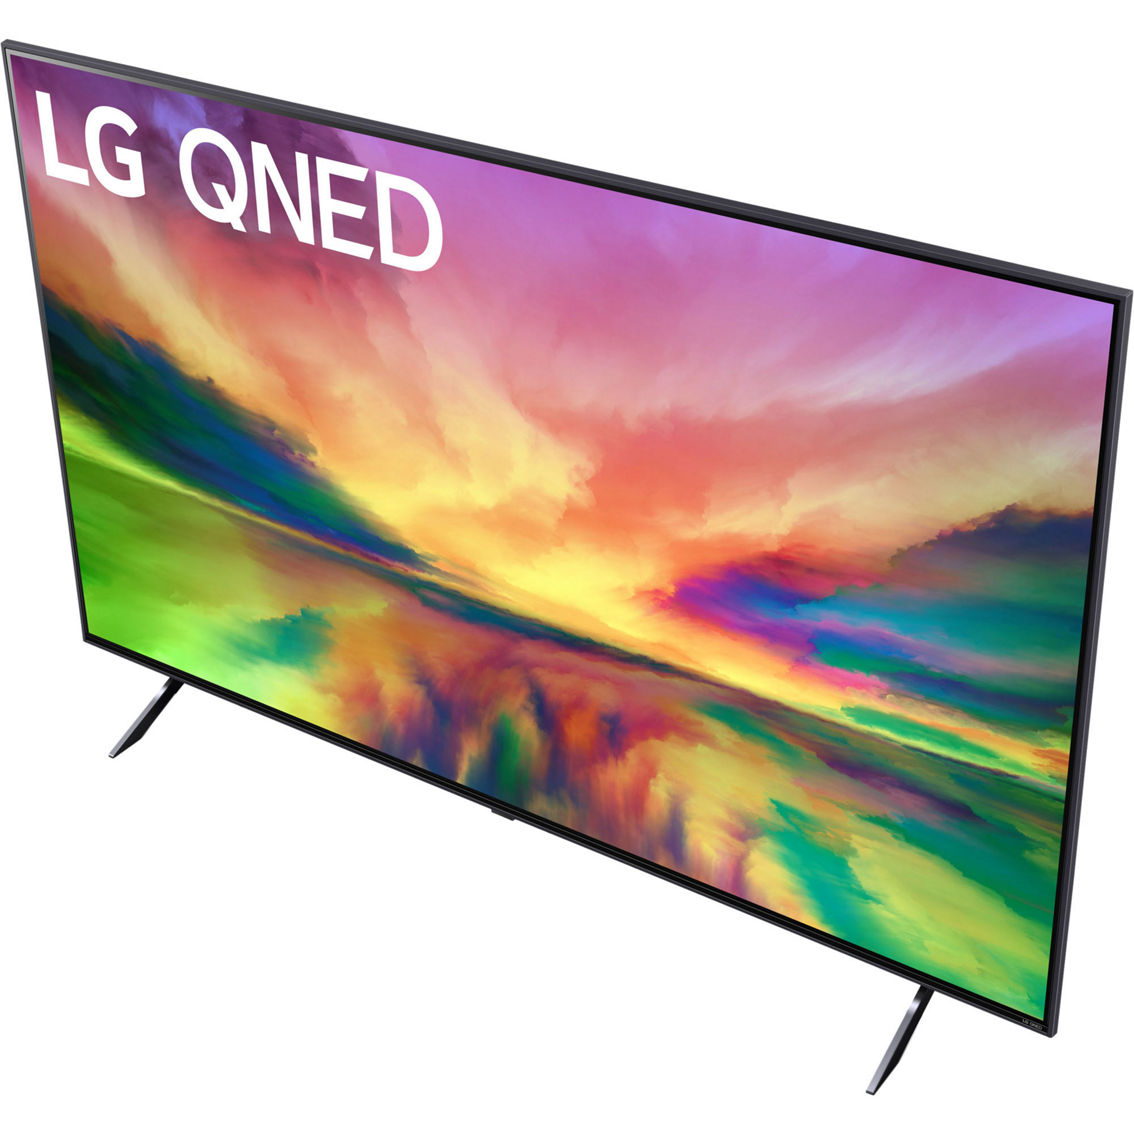 LG 75 in. QNED 4K 120Hz HDR Smart TV with AI ThinQ 75QNED80URA - Image 5 of 10